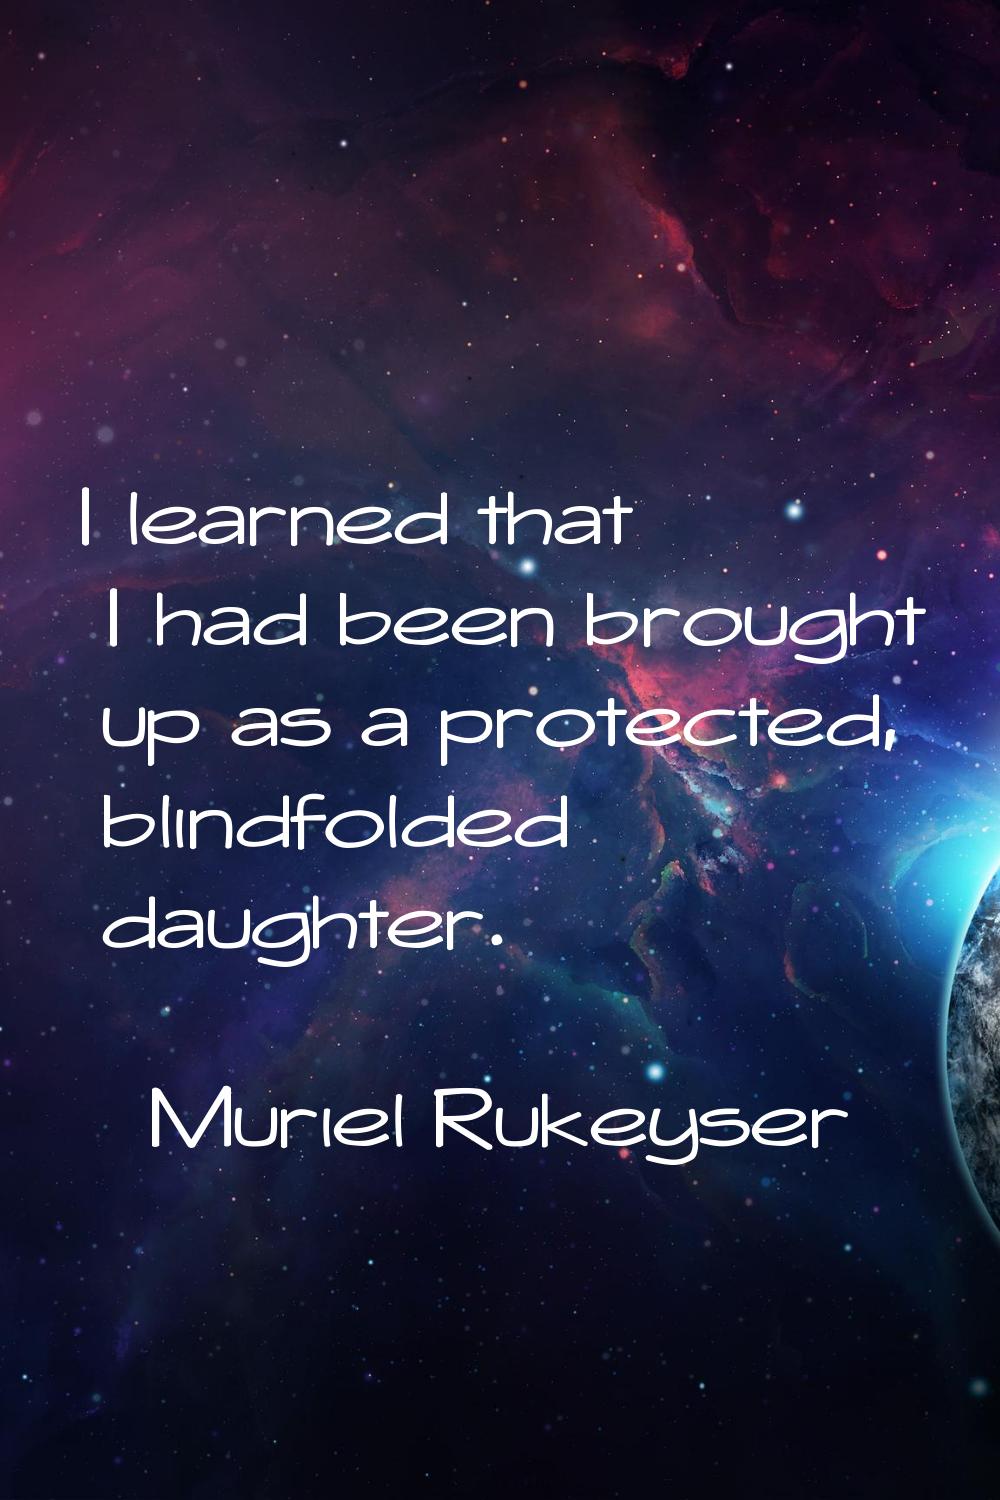 I learned that I had been brought up as a protected, blindfolded daughter.